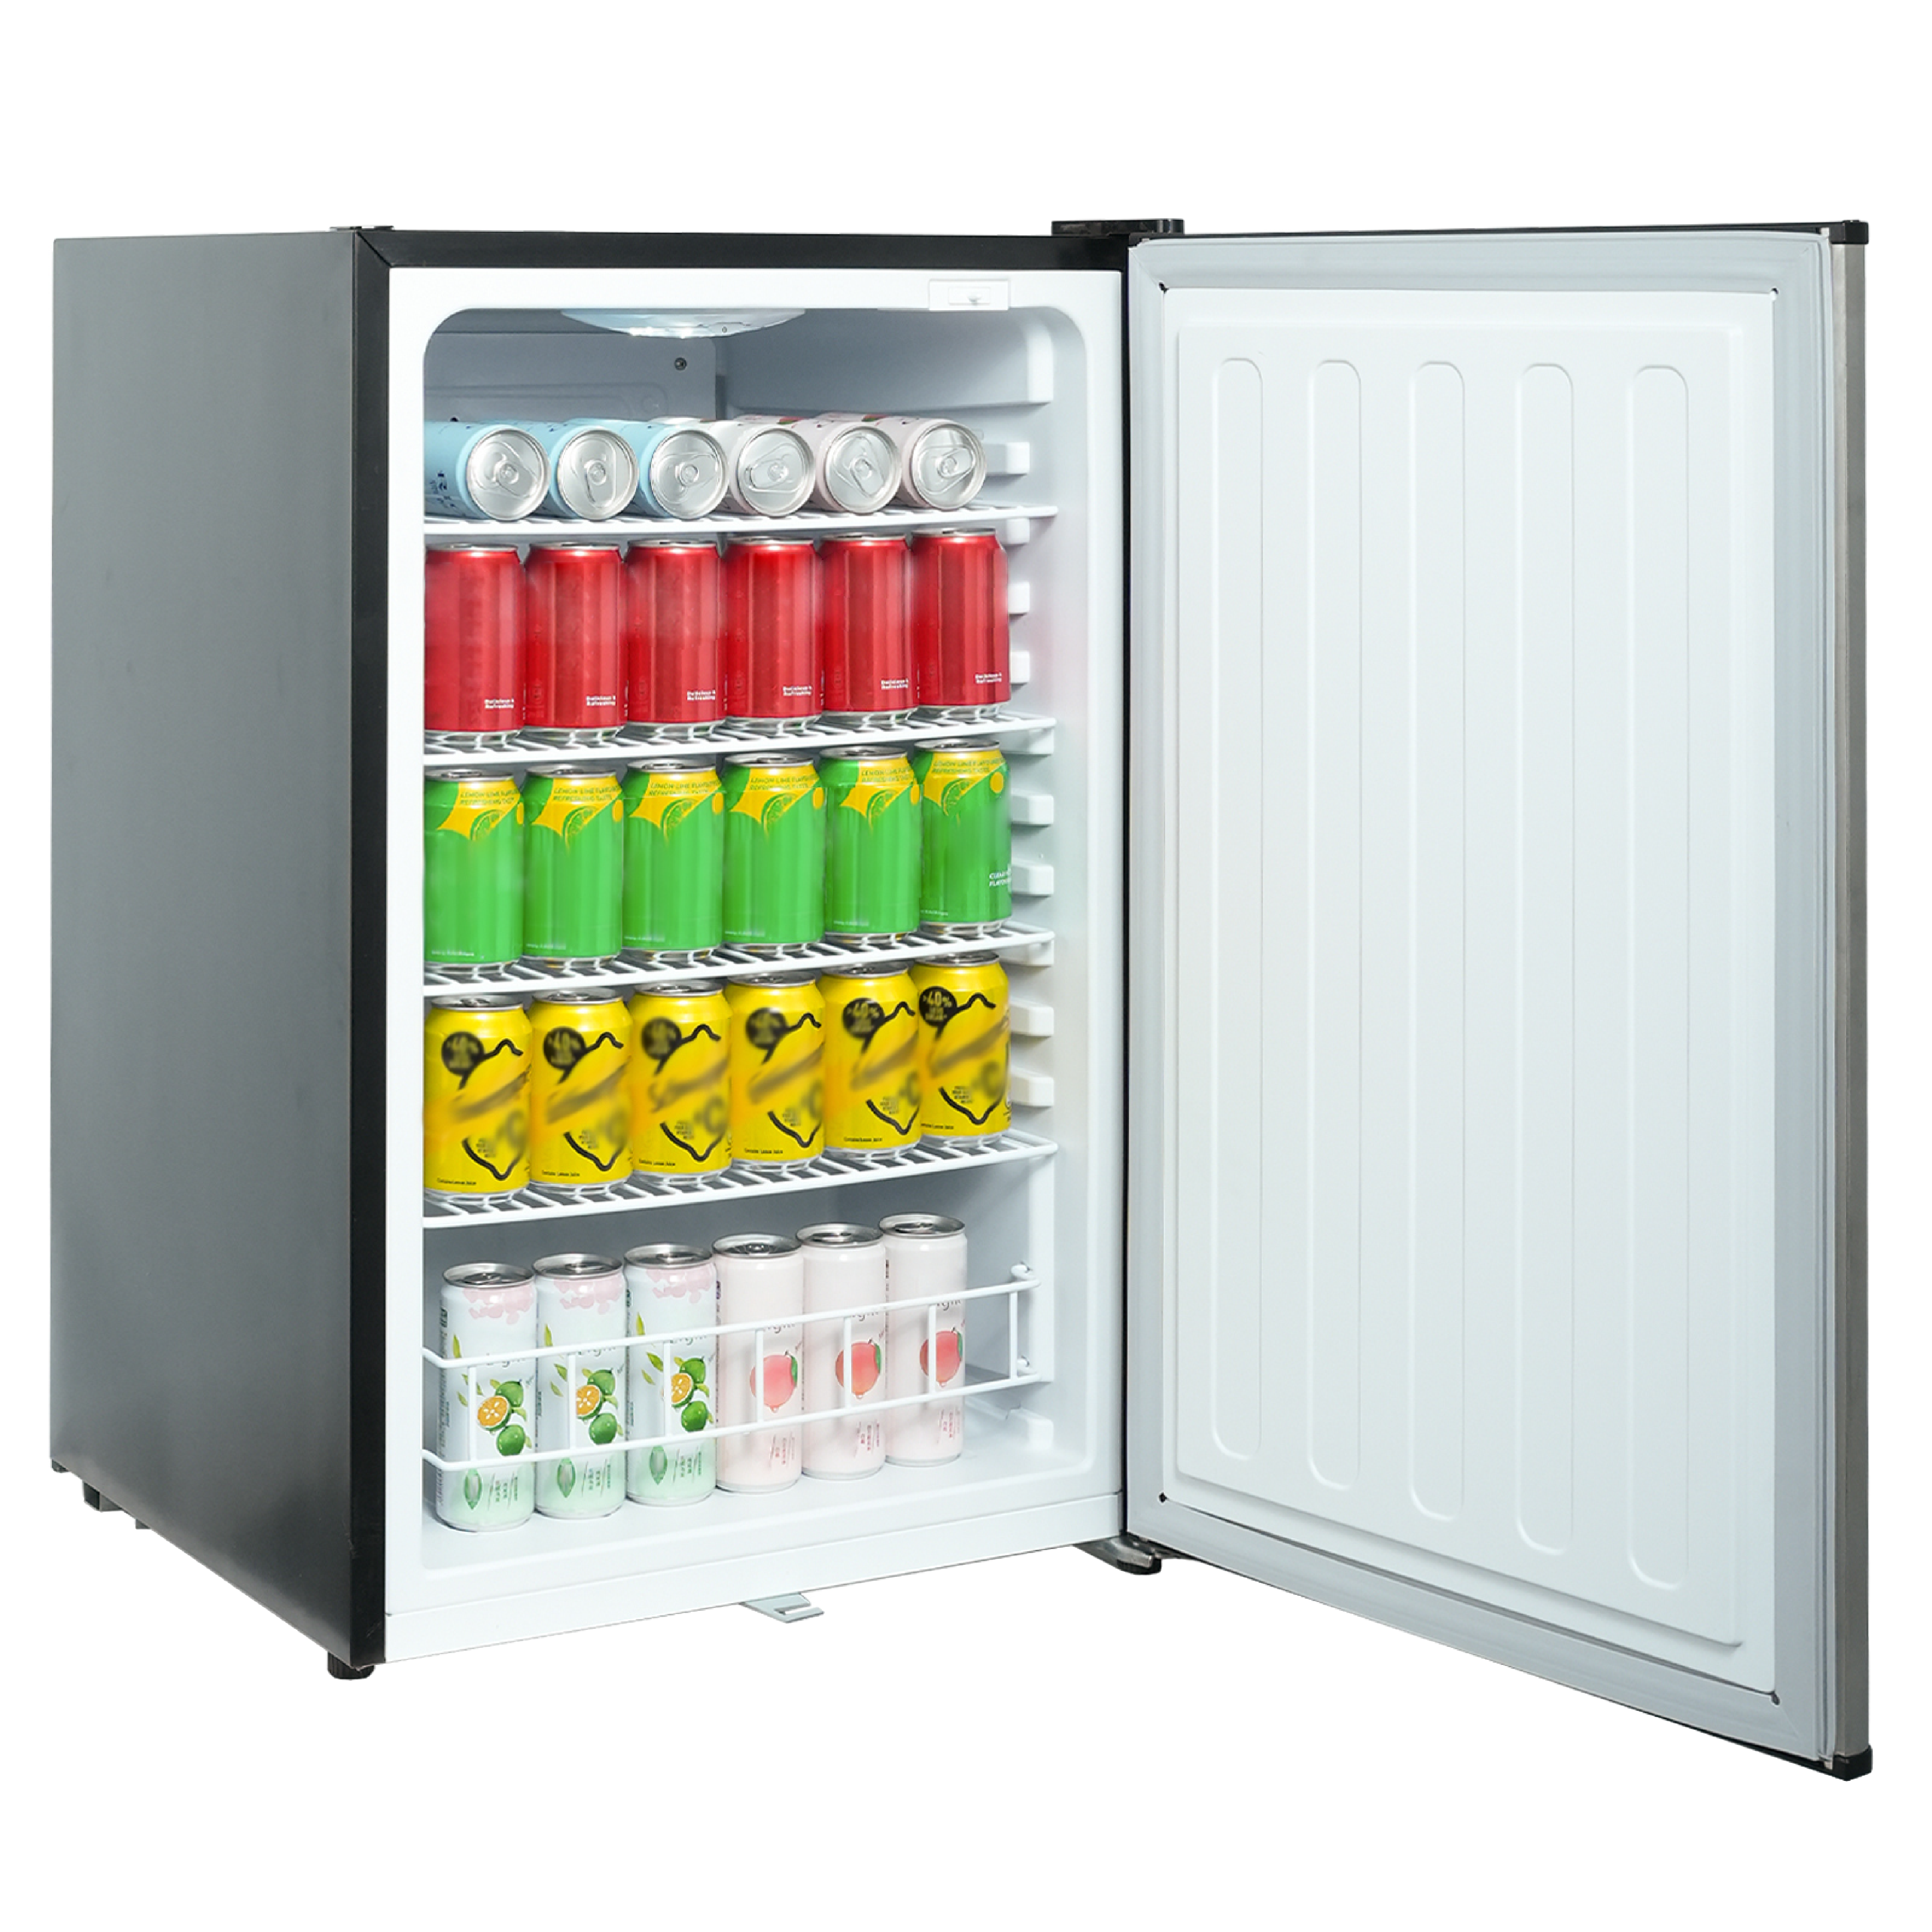 Side view of a 4.1 Cu Ft Stainless Steel Outdoor Beverage Fridge 156 cans with the door open, revealing four shelves and fully stocked with beverage cans